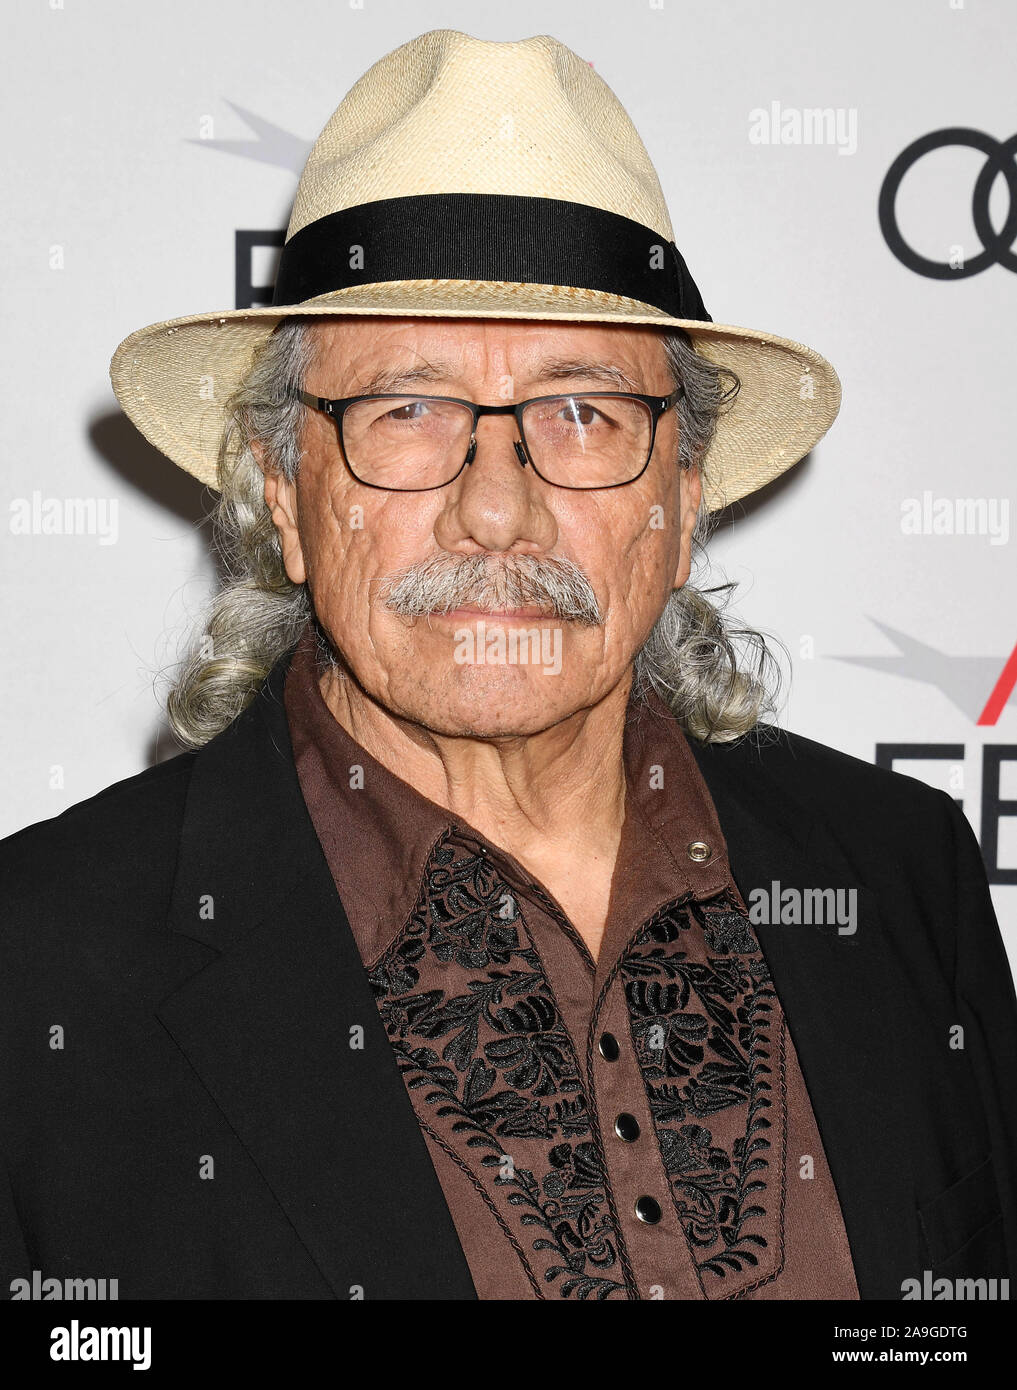 HOLLYWOOD, CA - NOVEMBER 14: Edward James Olmos attends the 'Queen & Slim' Premiere at AFI FEST 2019 presented by Audi at the TCL Chinese Theatre on November 14, 2019 in Hollywood, California. Stock Photo